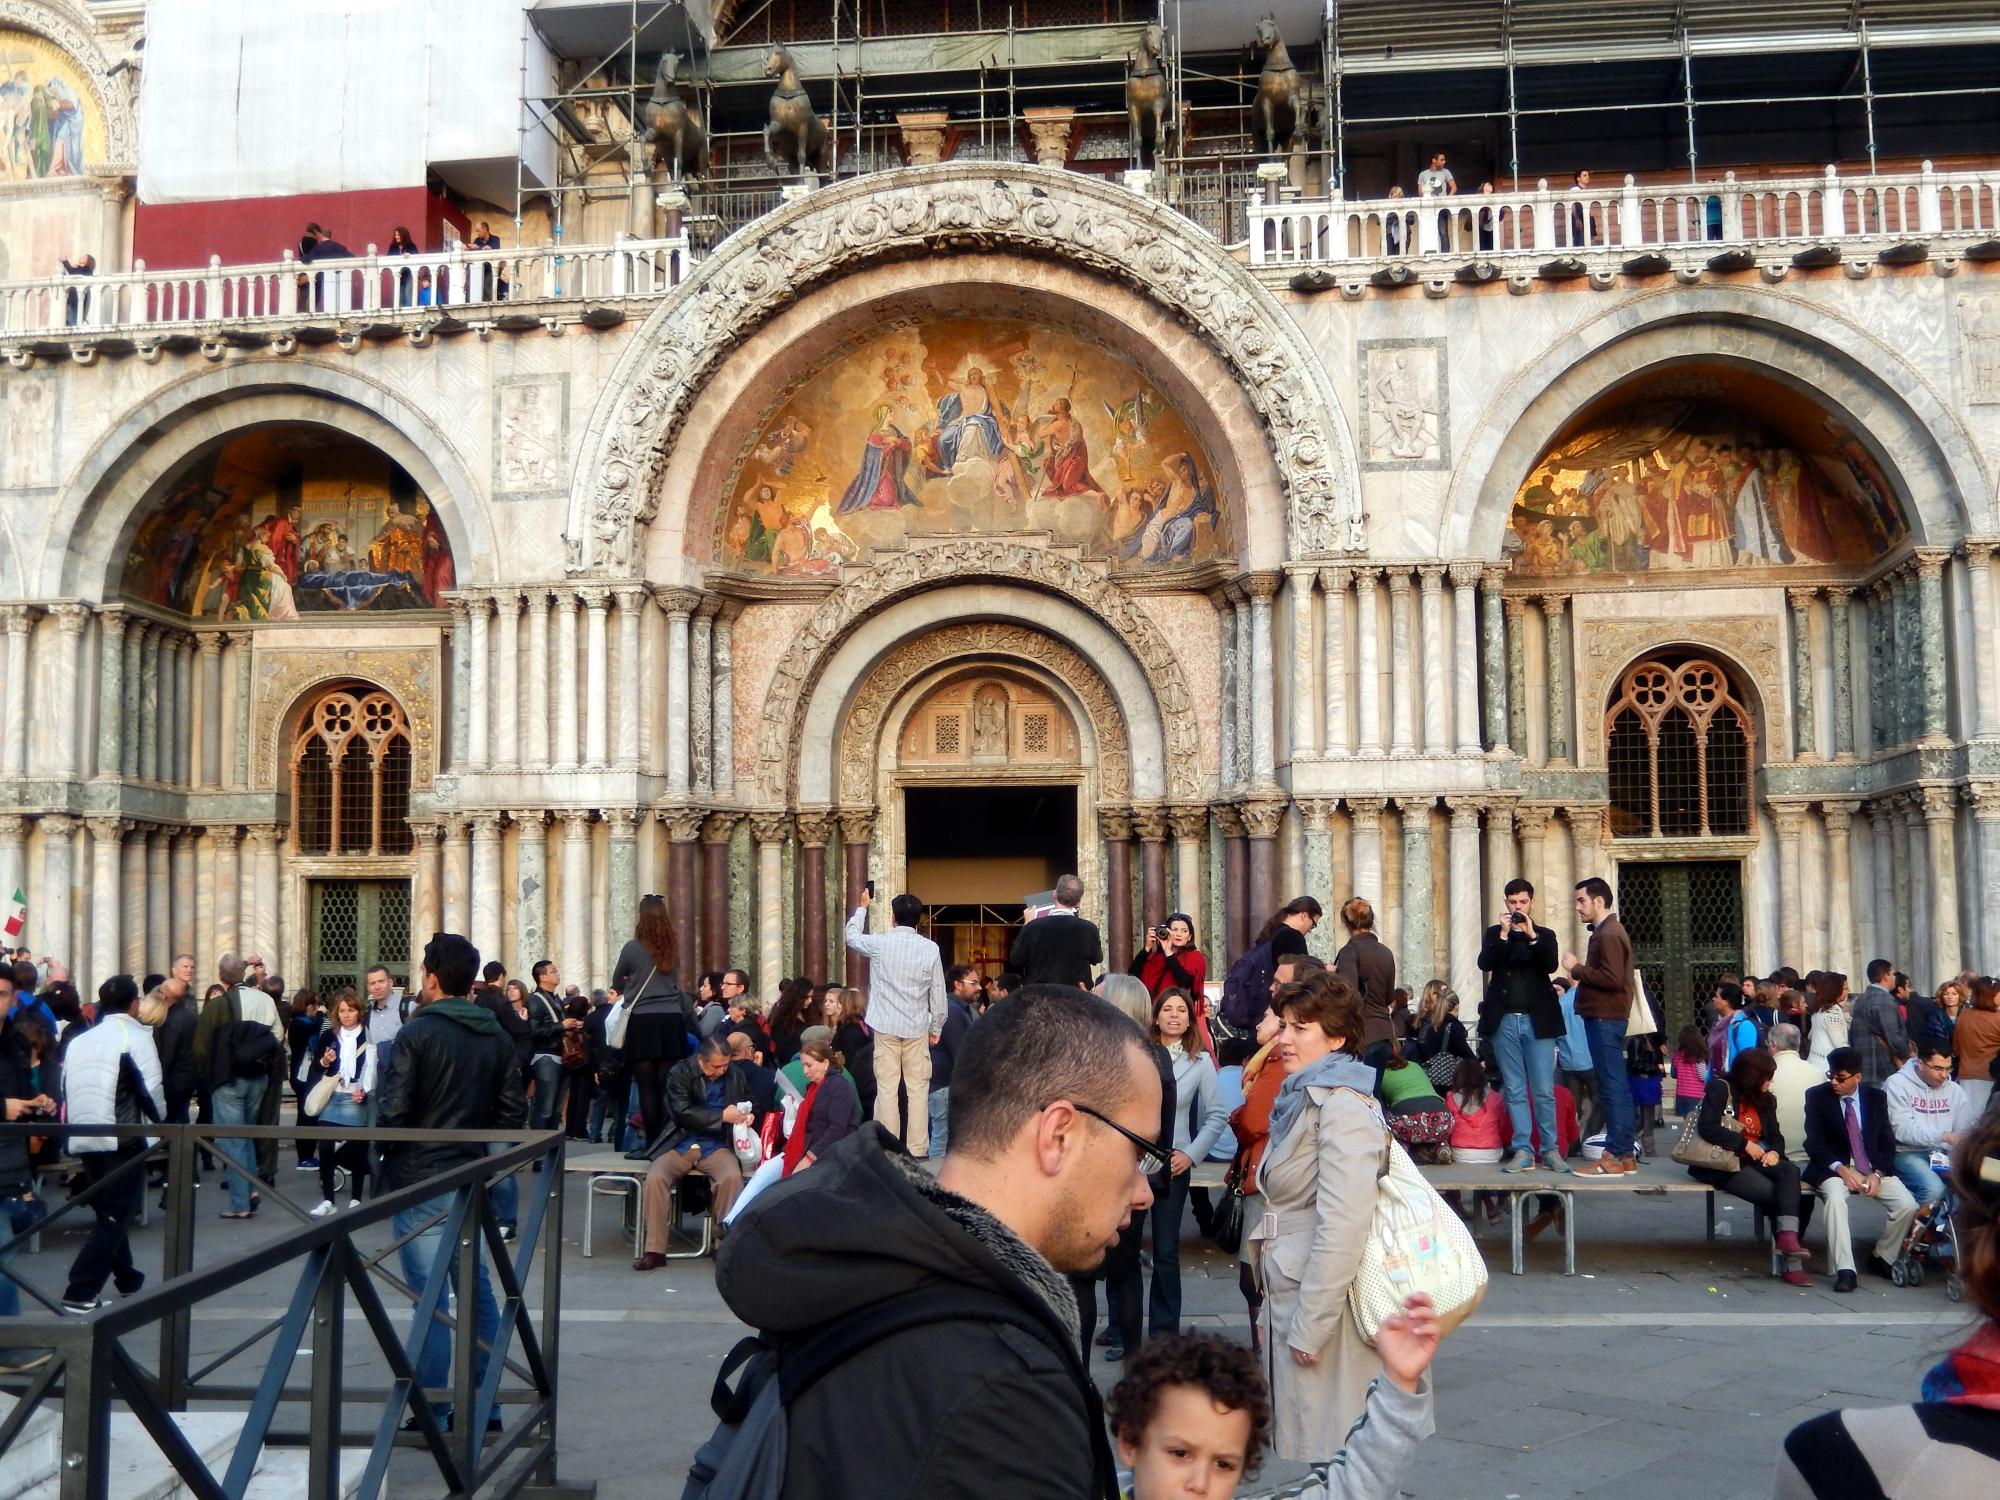 Italy - Piazza San Marco #4